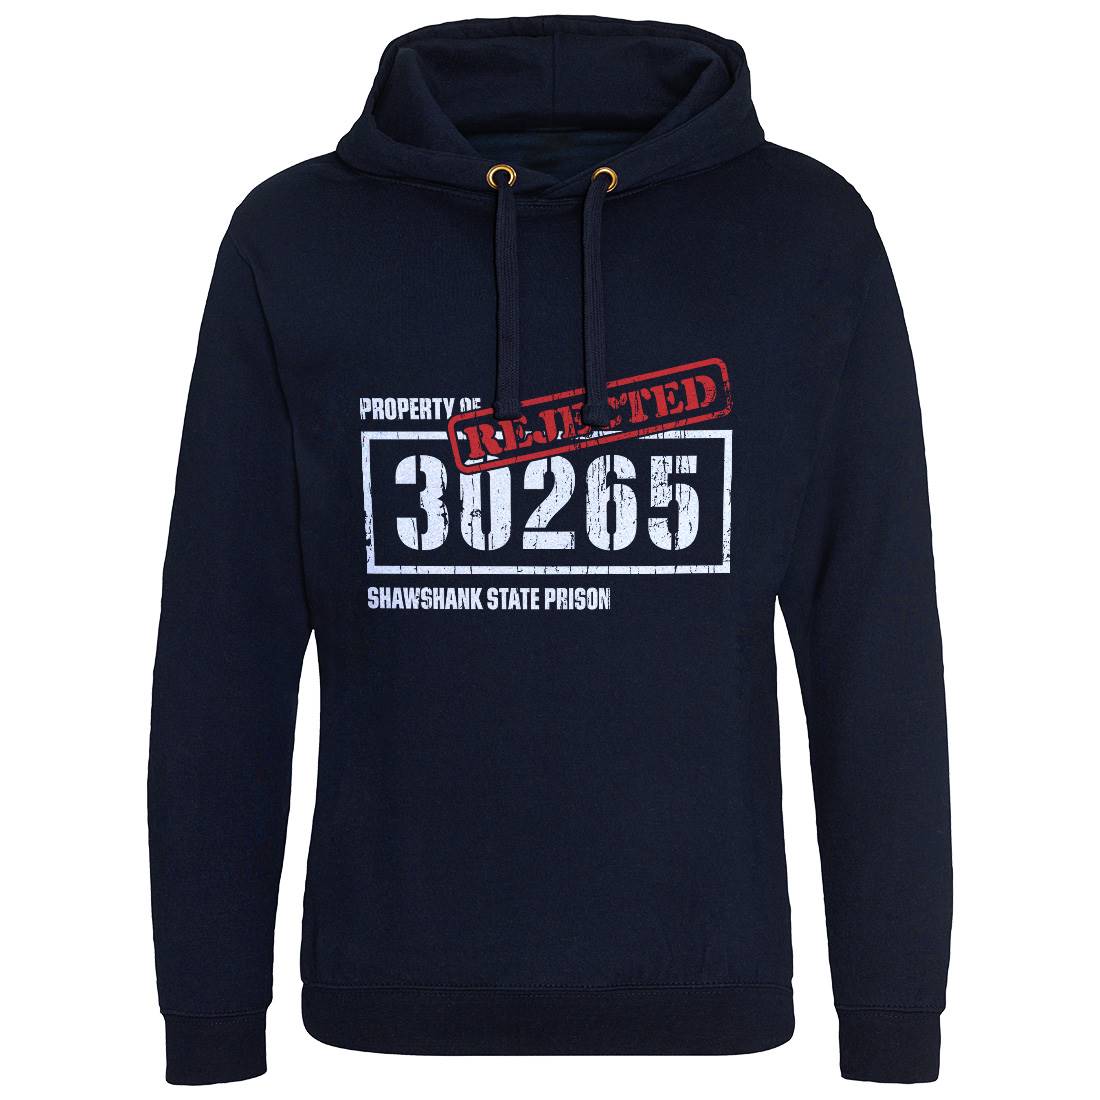 Reds Mens Hoodie Without Pocket Retro D304